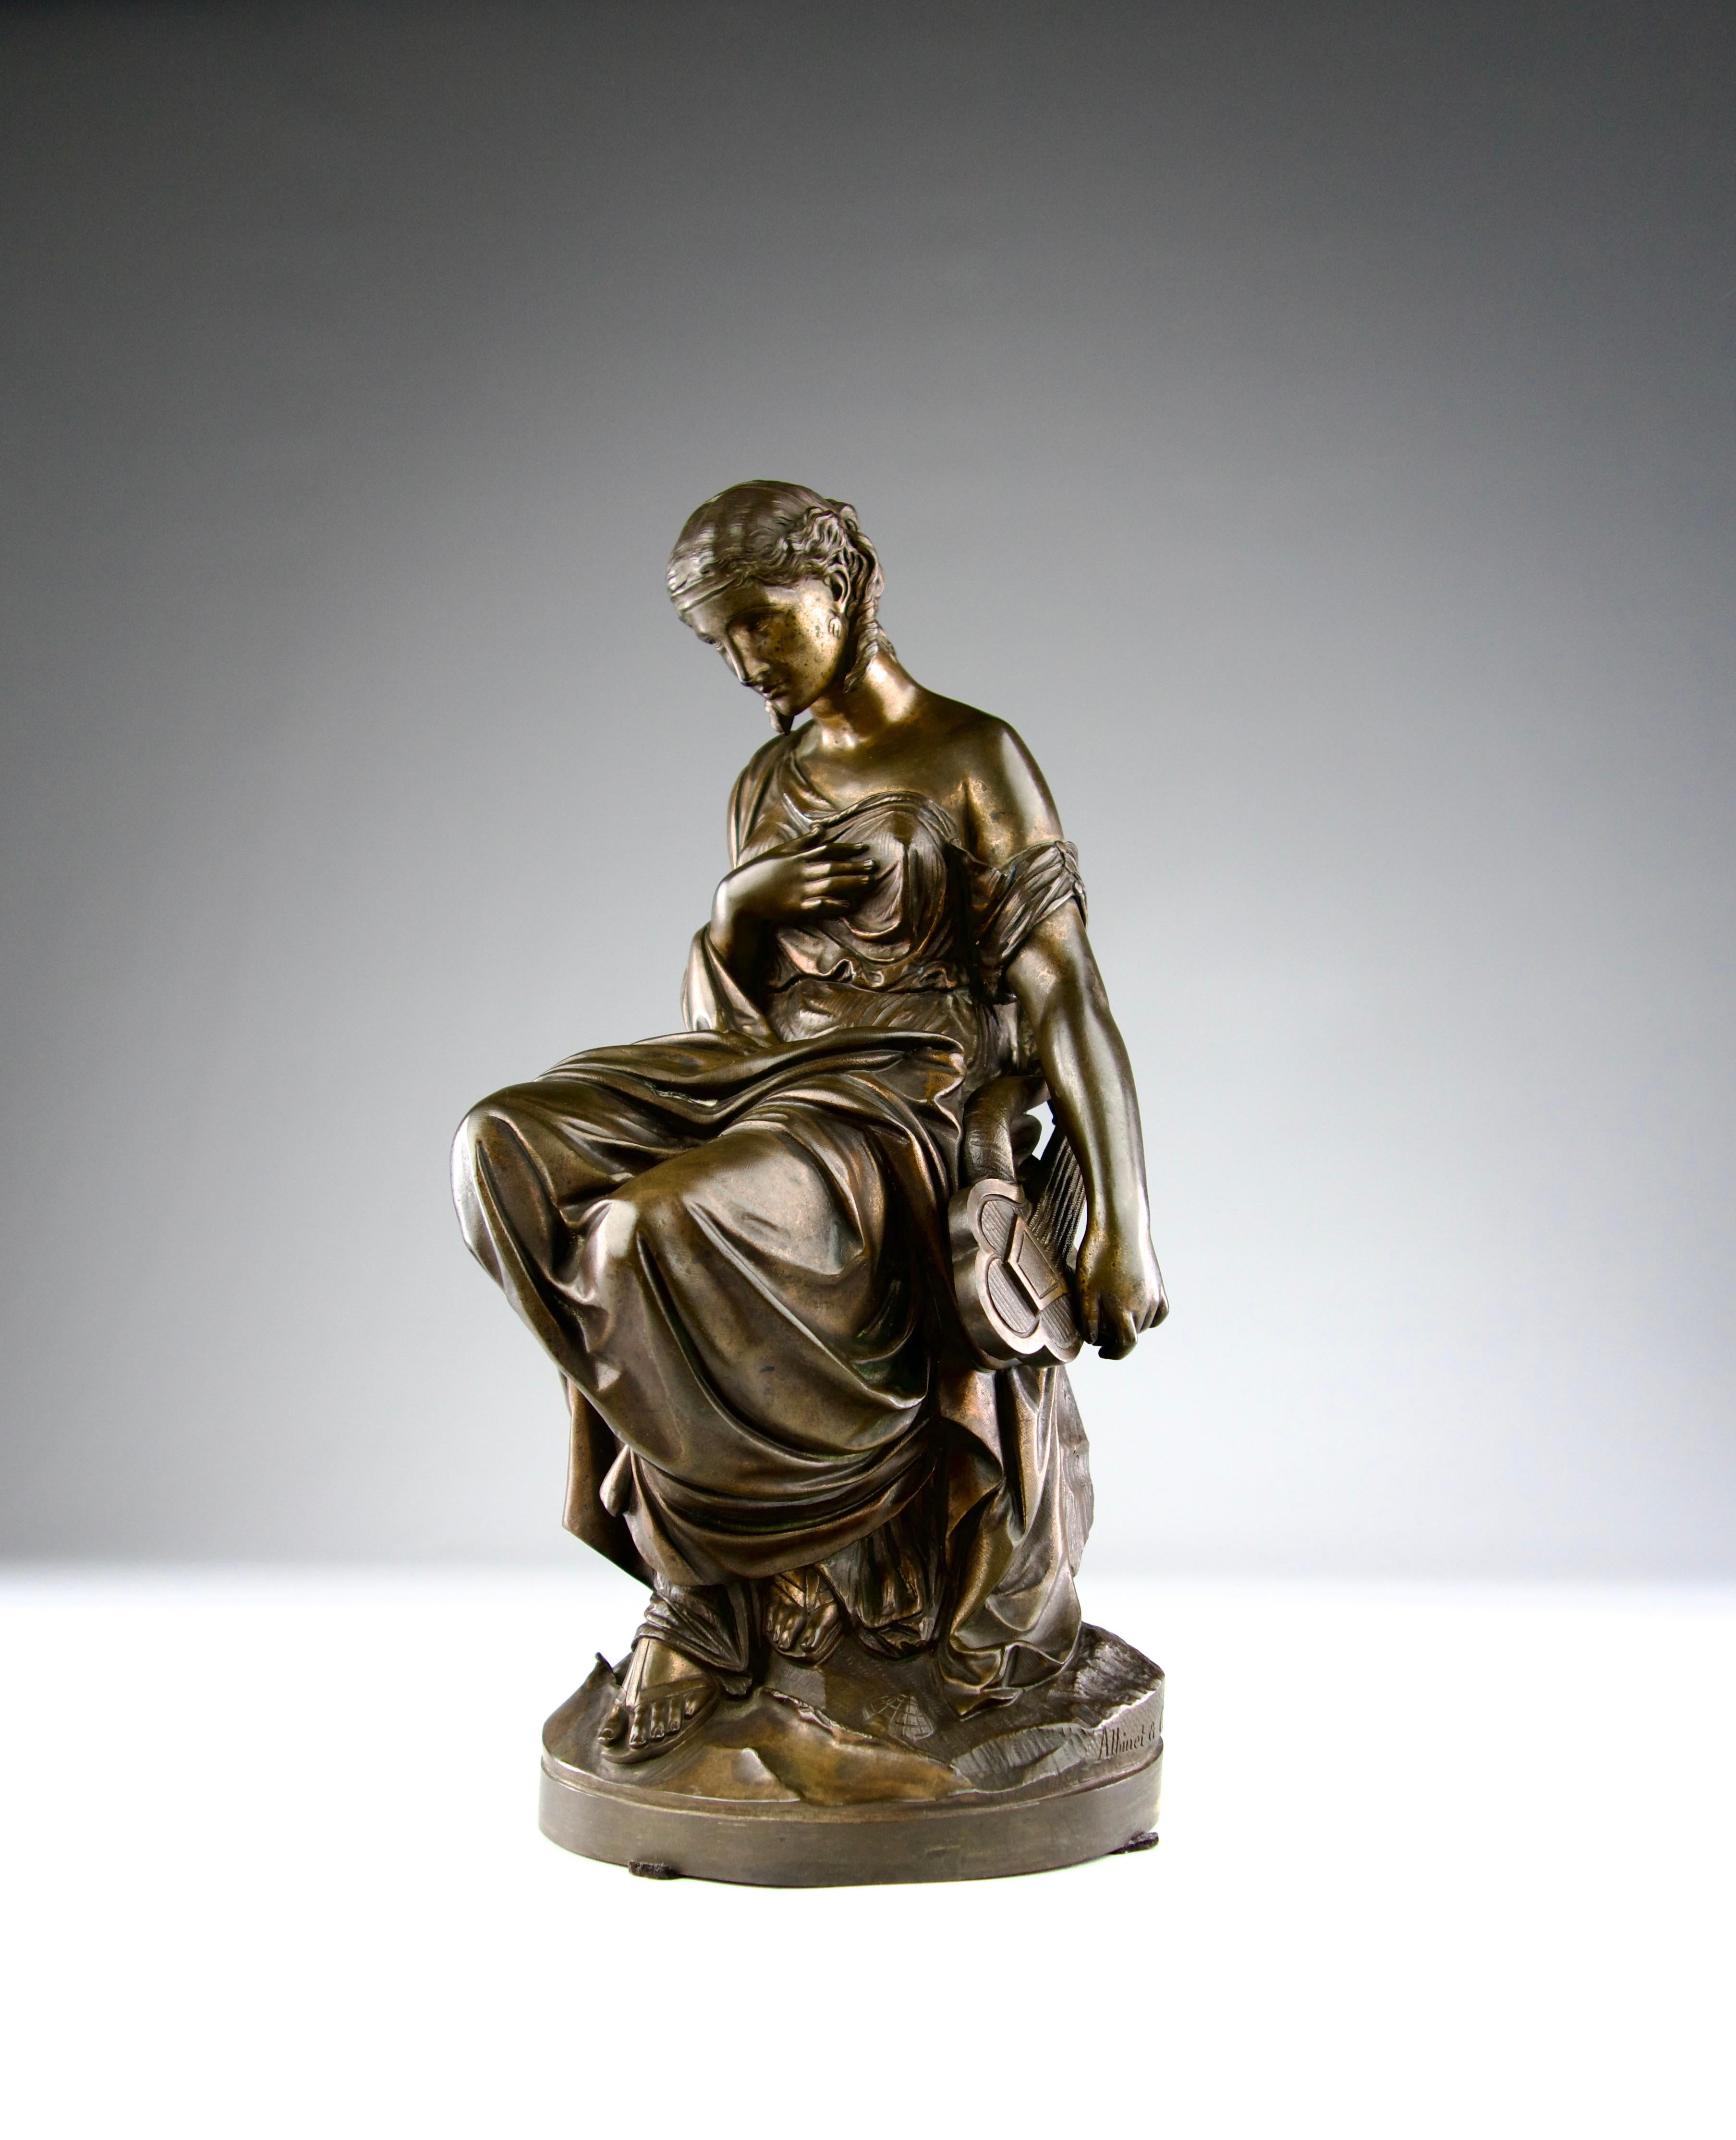 Romantic Emile Carlier, Bronze Sculpture of Sappho and her Lyre by the Sea, 19th Century For Sale